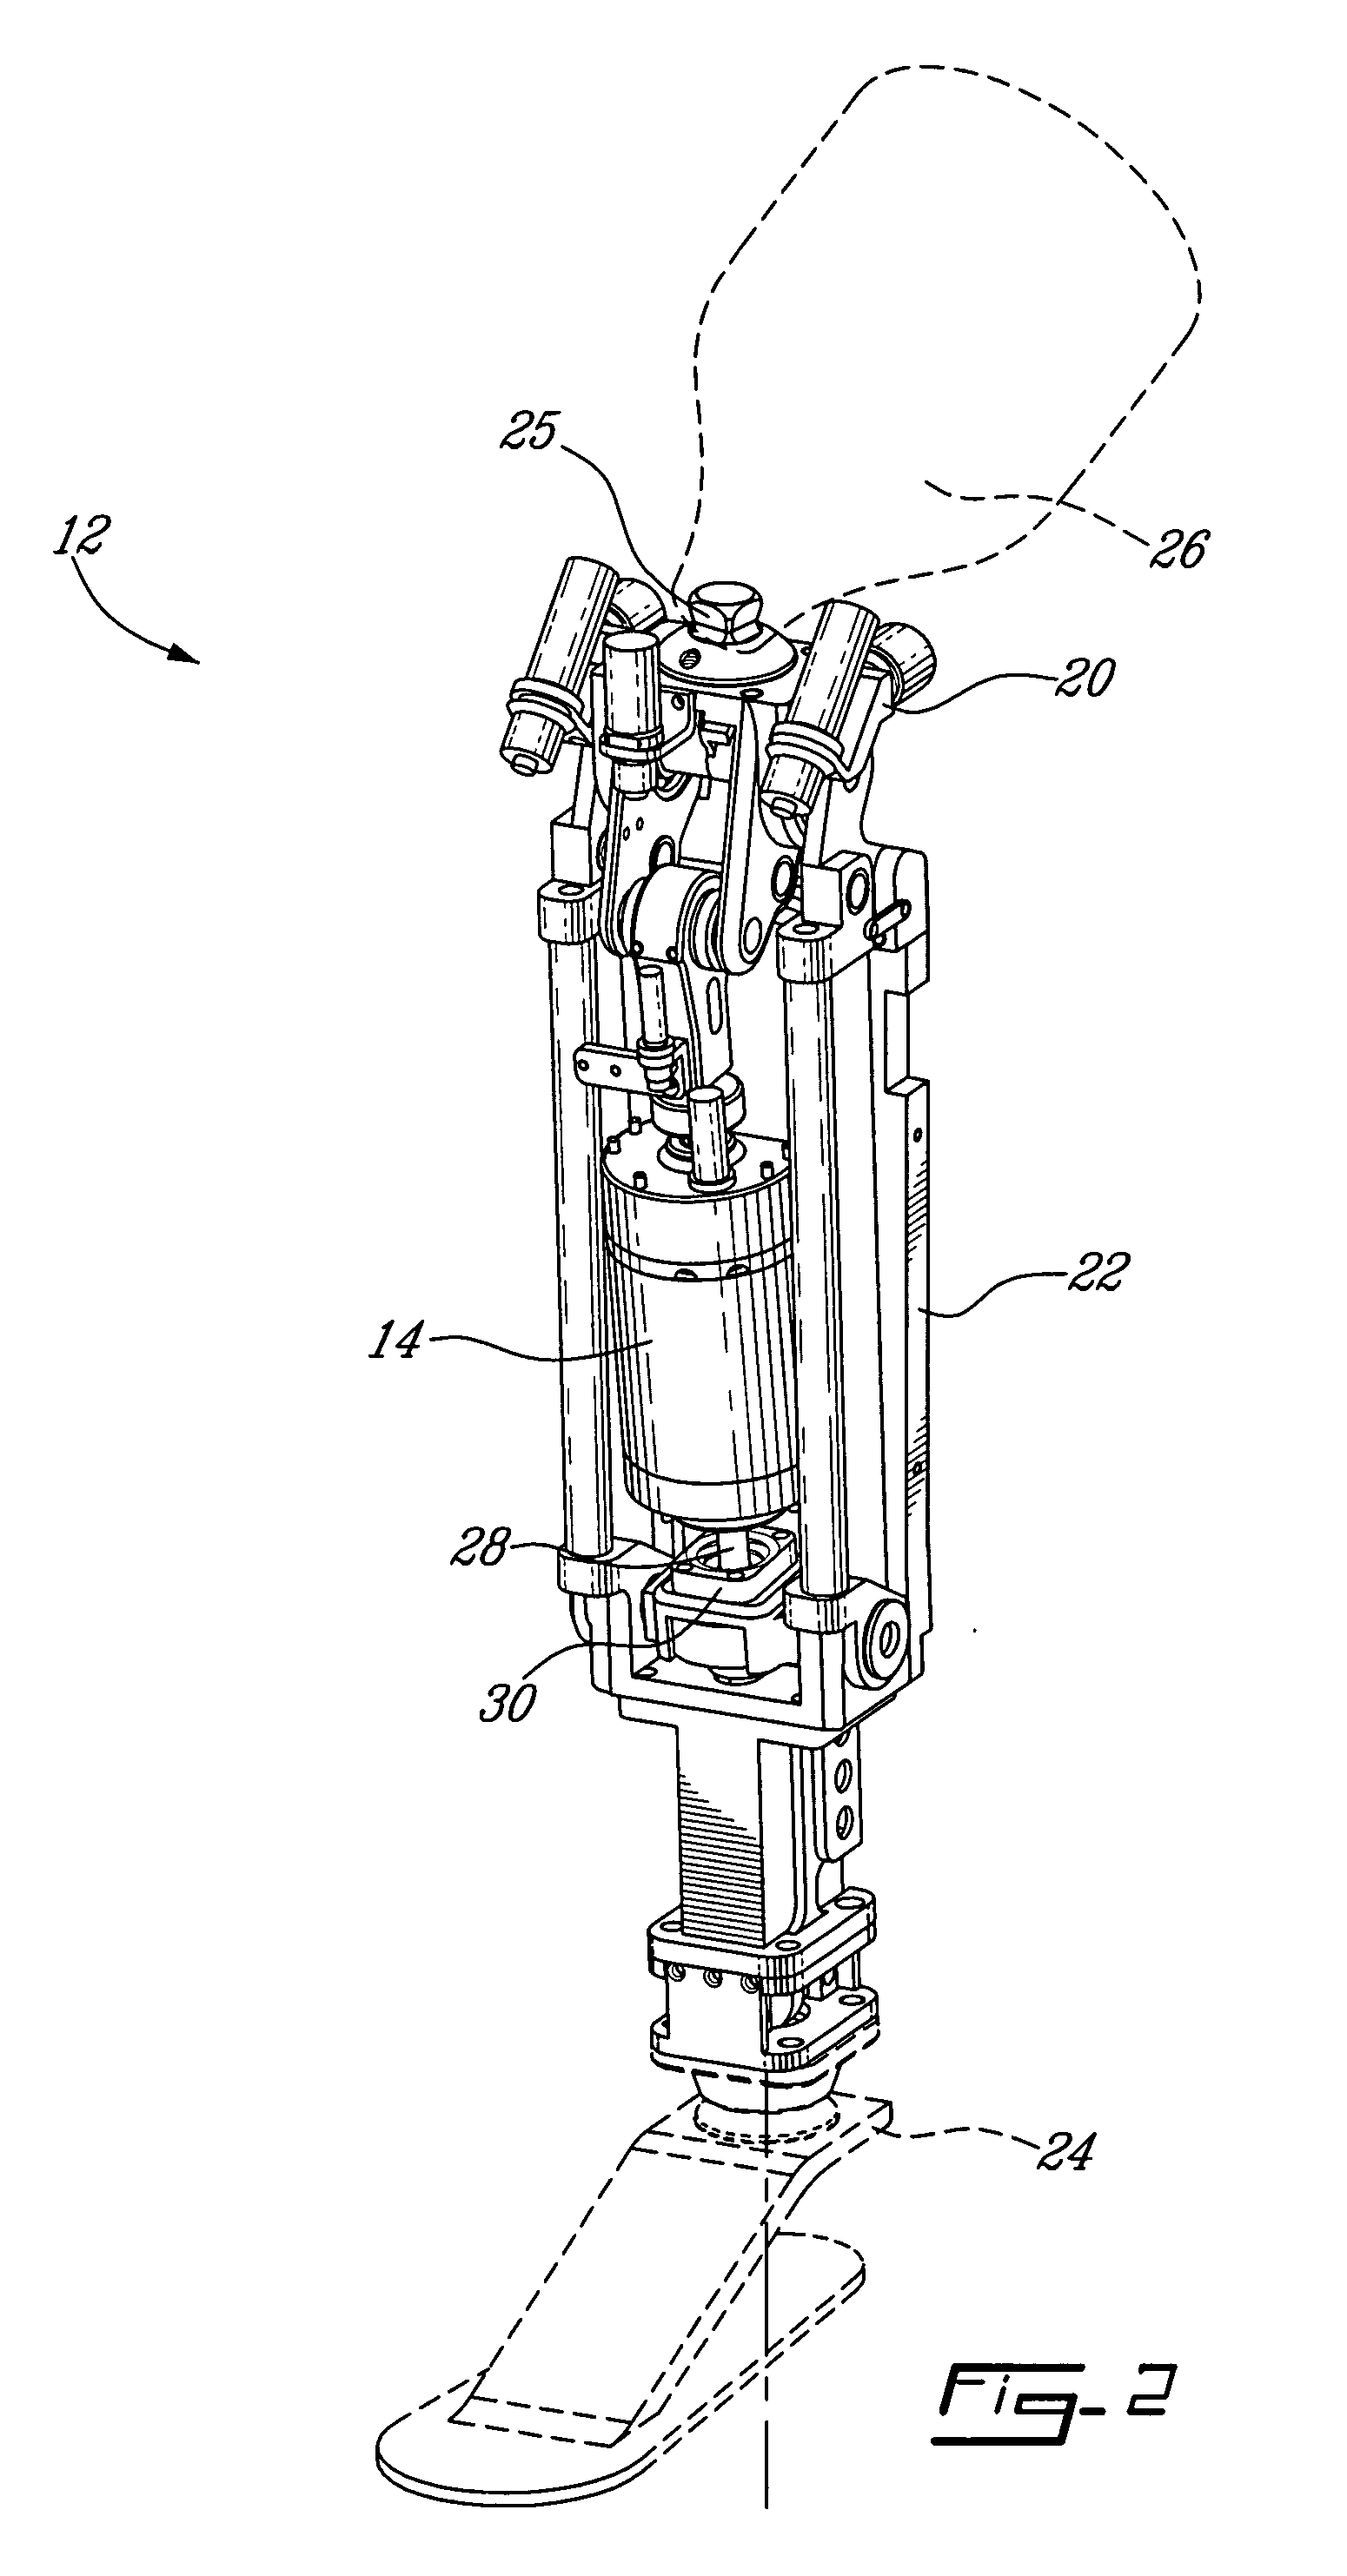 Control device and system for controlling an actuated prosthesis